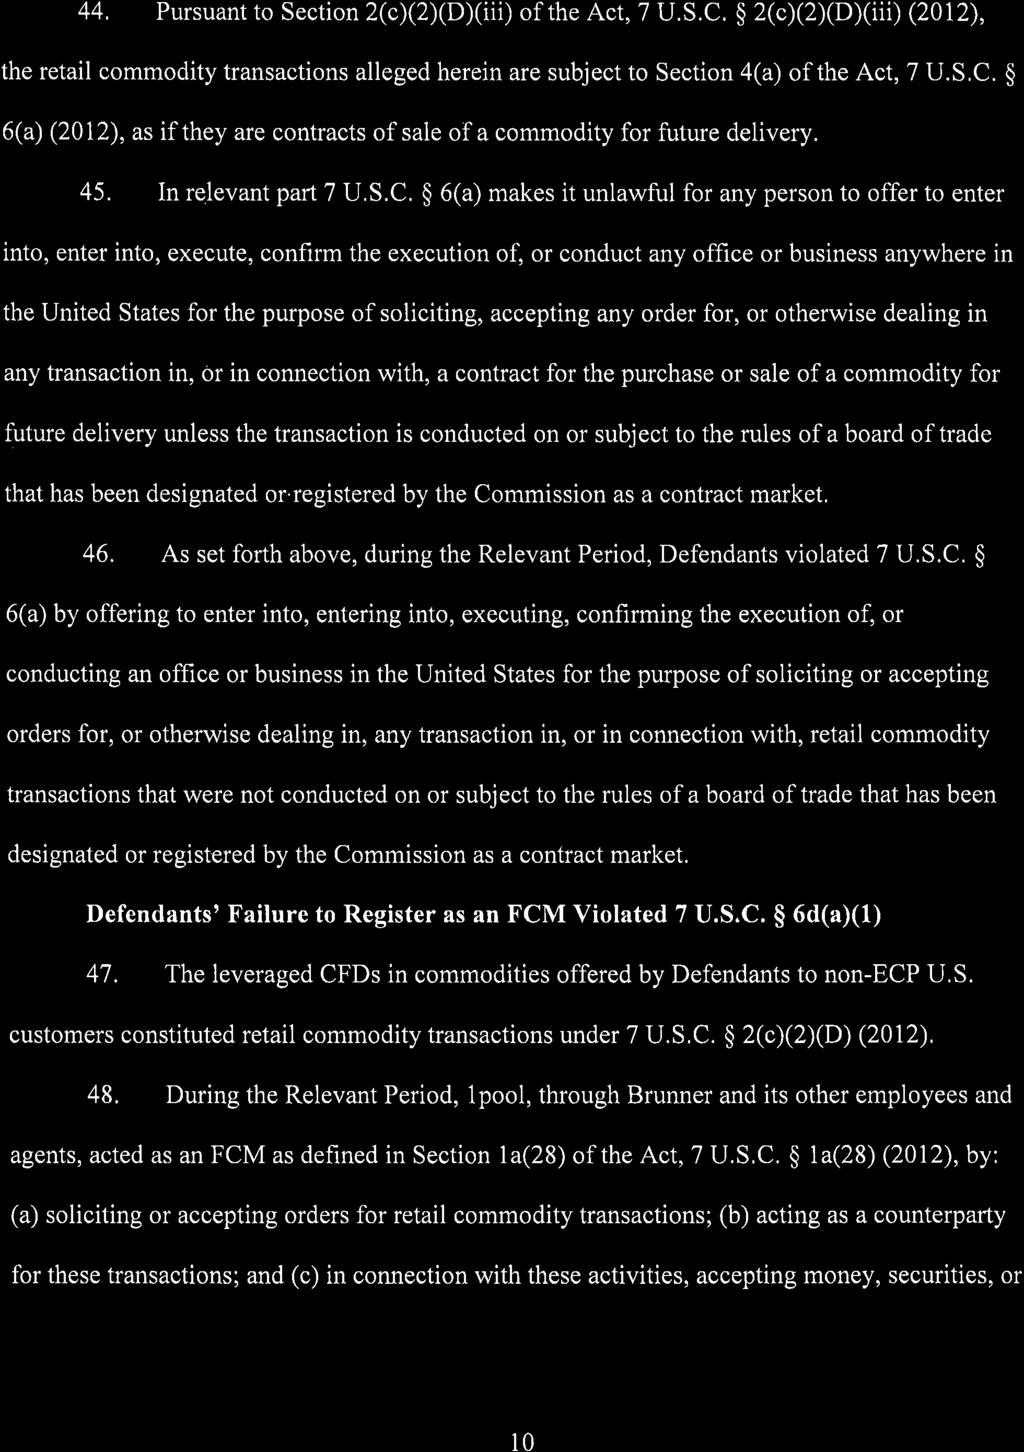 Case 1:18-cv-02243-TNM Document 14 Filed 03/04/19 Page 10 of 20 44. Pursuant to Section 2(c(2(D(iii of the Act, 7 U.S.C. 2(c(2(D(iii (2012, the retail commodity transactions alleged herein are subject to Section 4(a of the Act, 7 U.